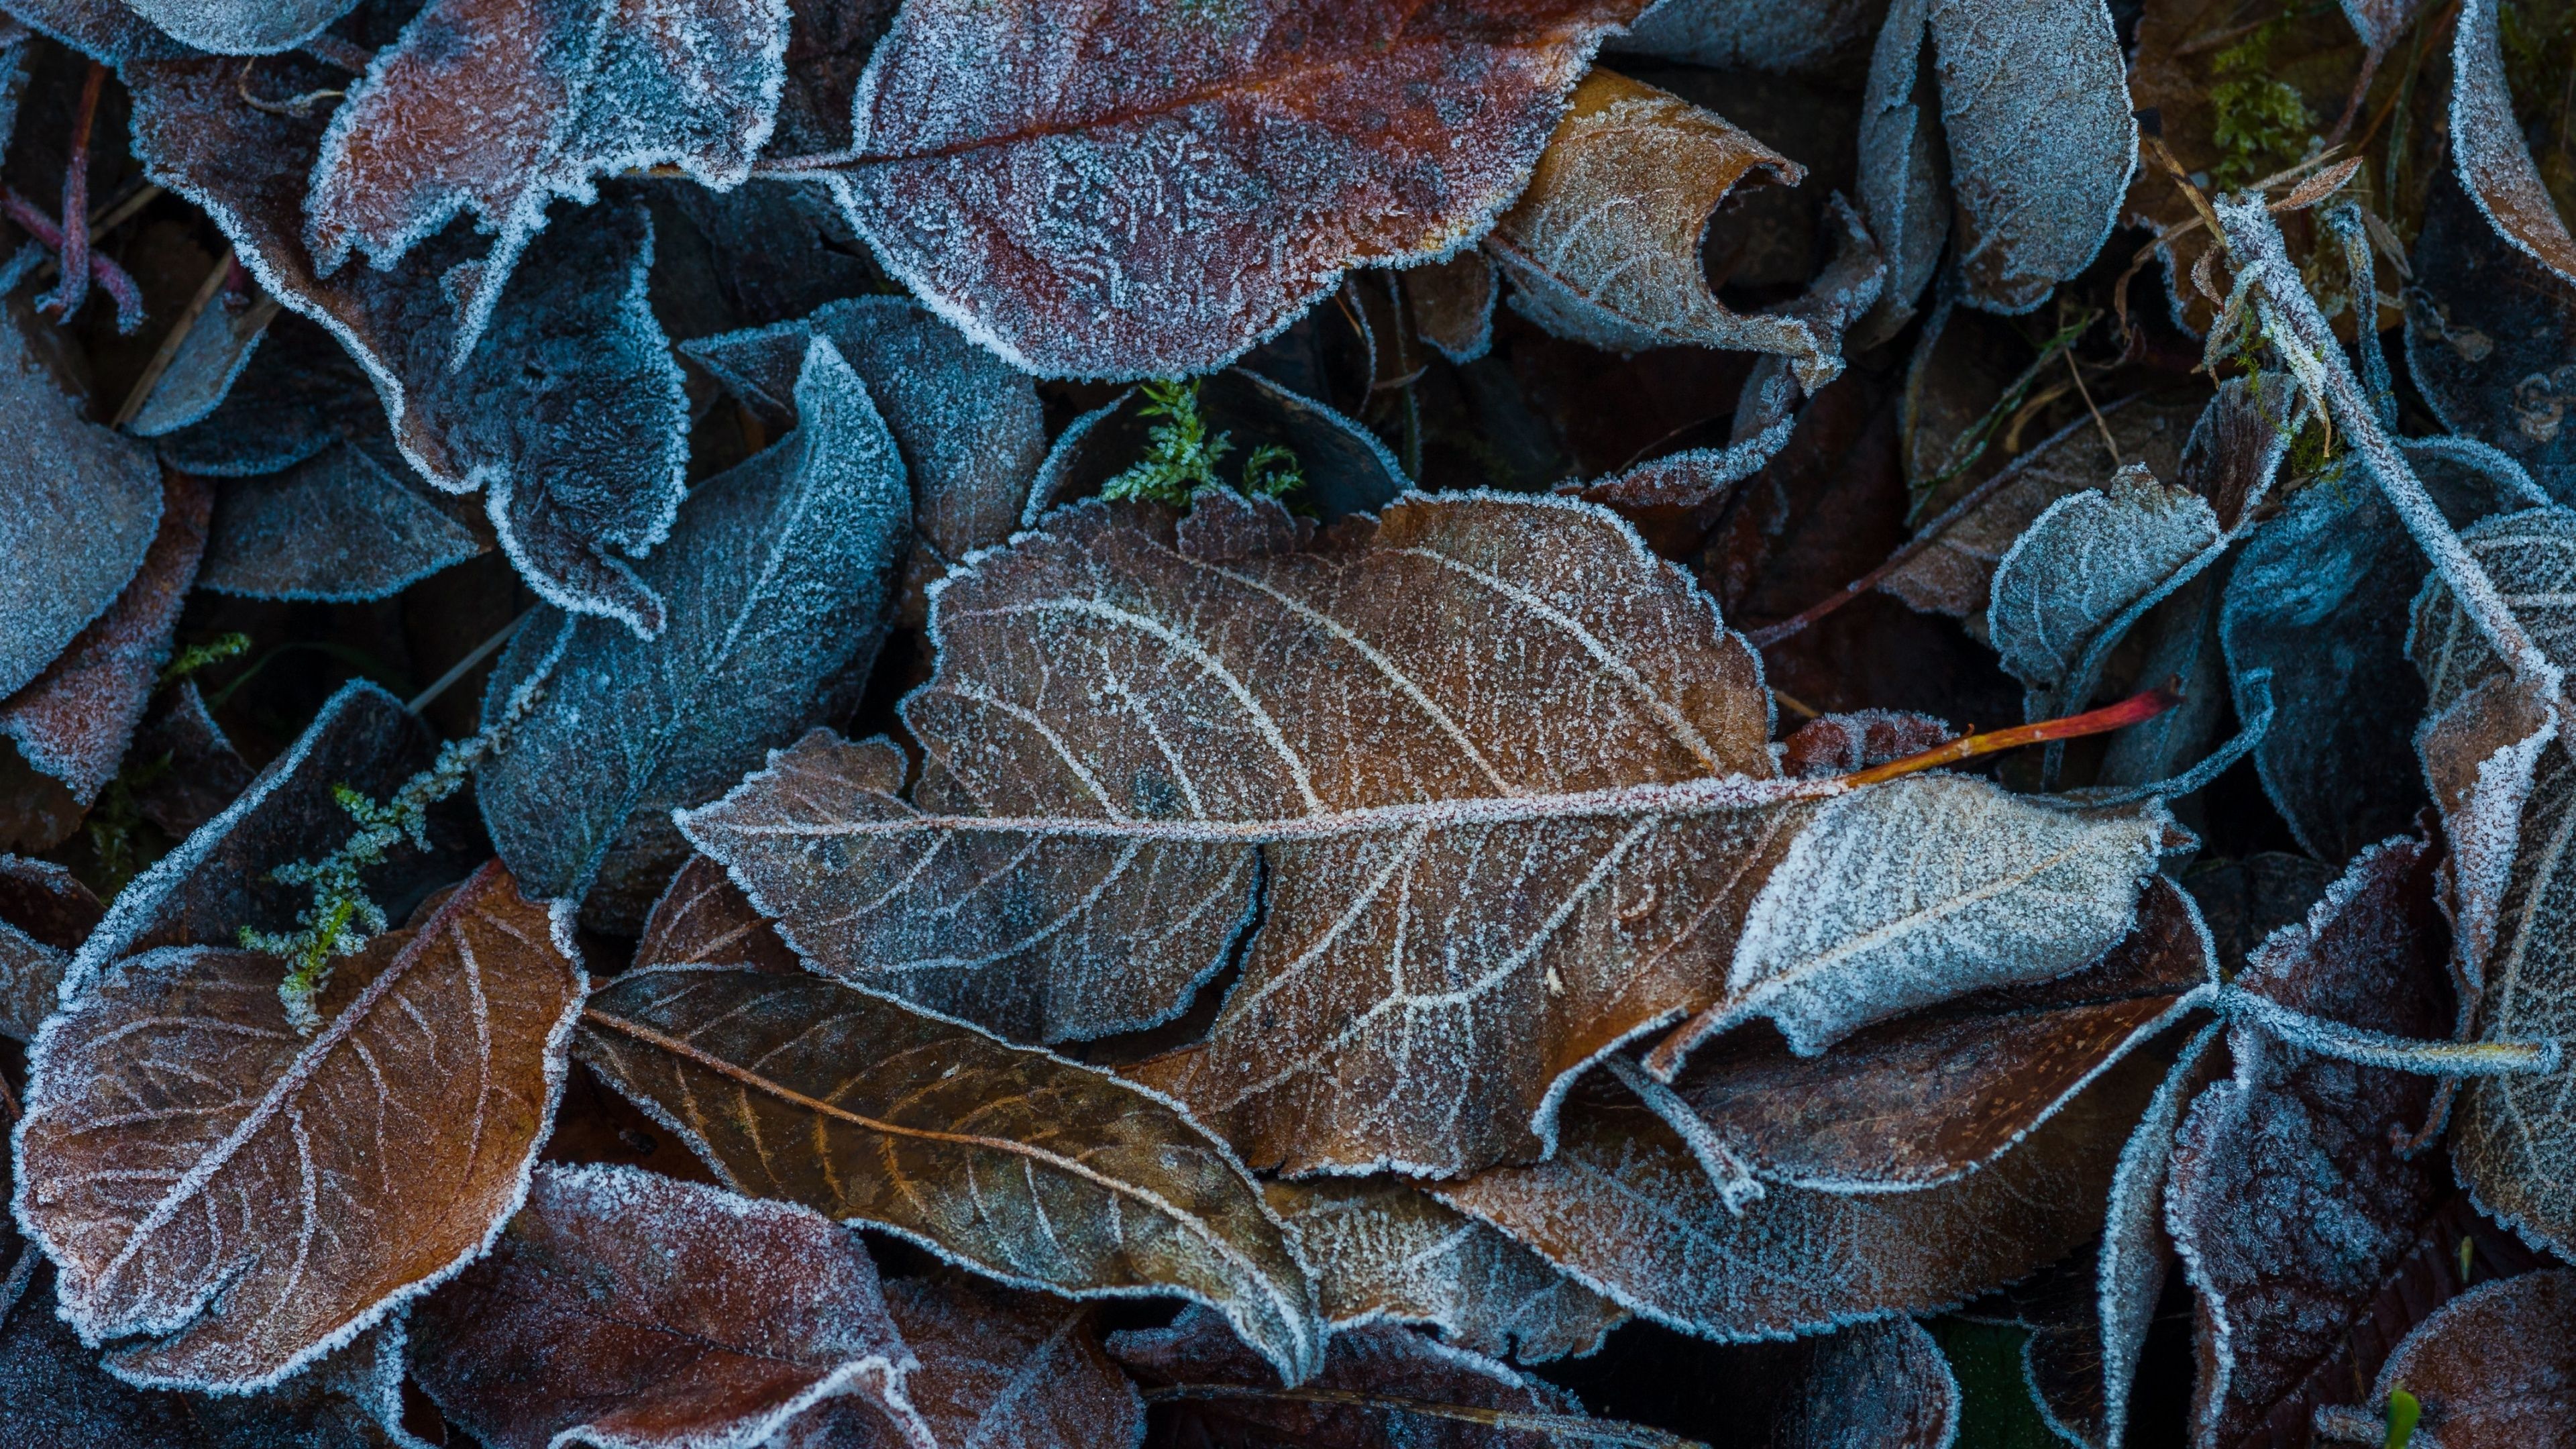 Frozen Leaves Wallpaper 4K, On the ground, Winter, Dry Leaves, Foliage, Nature